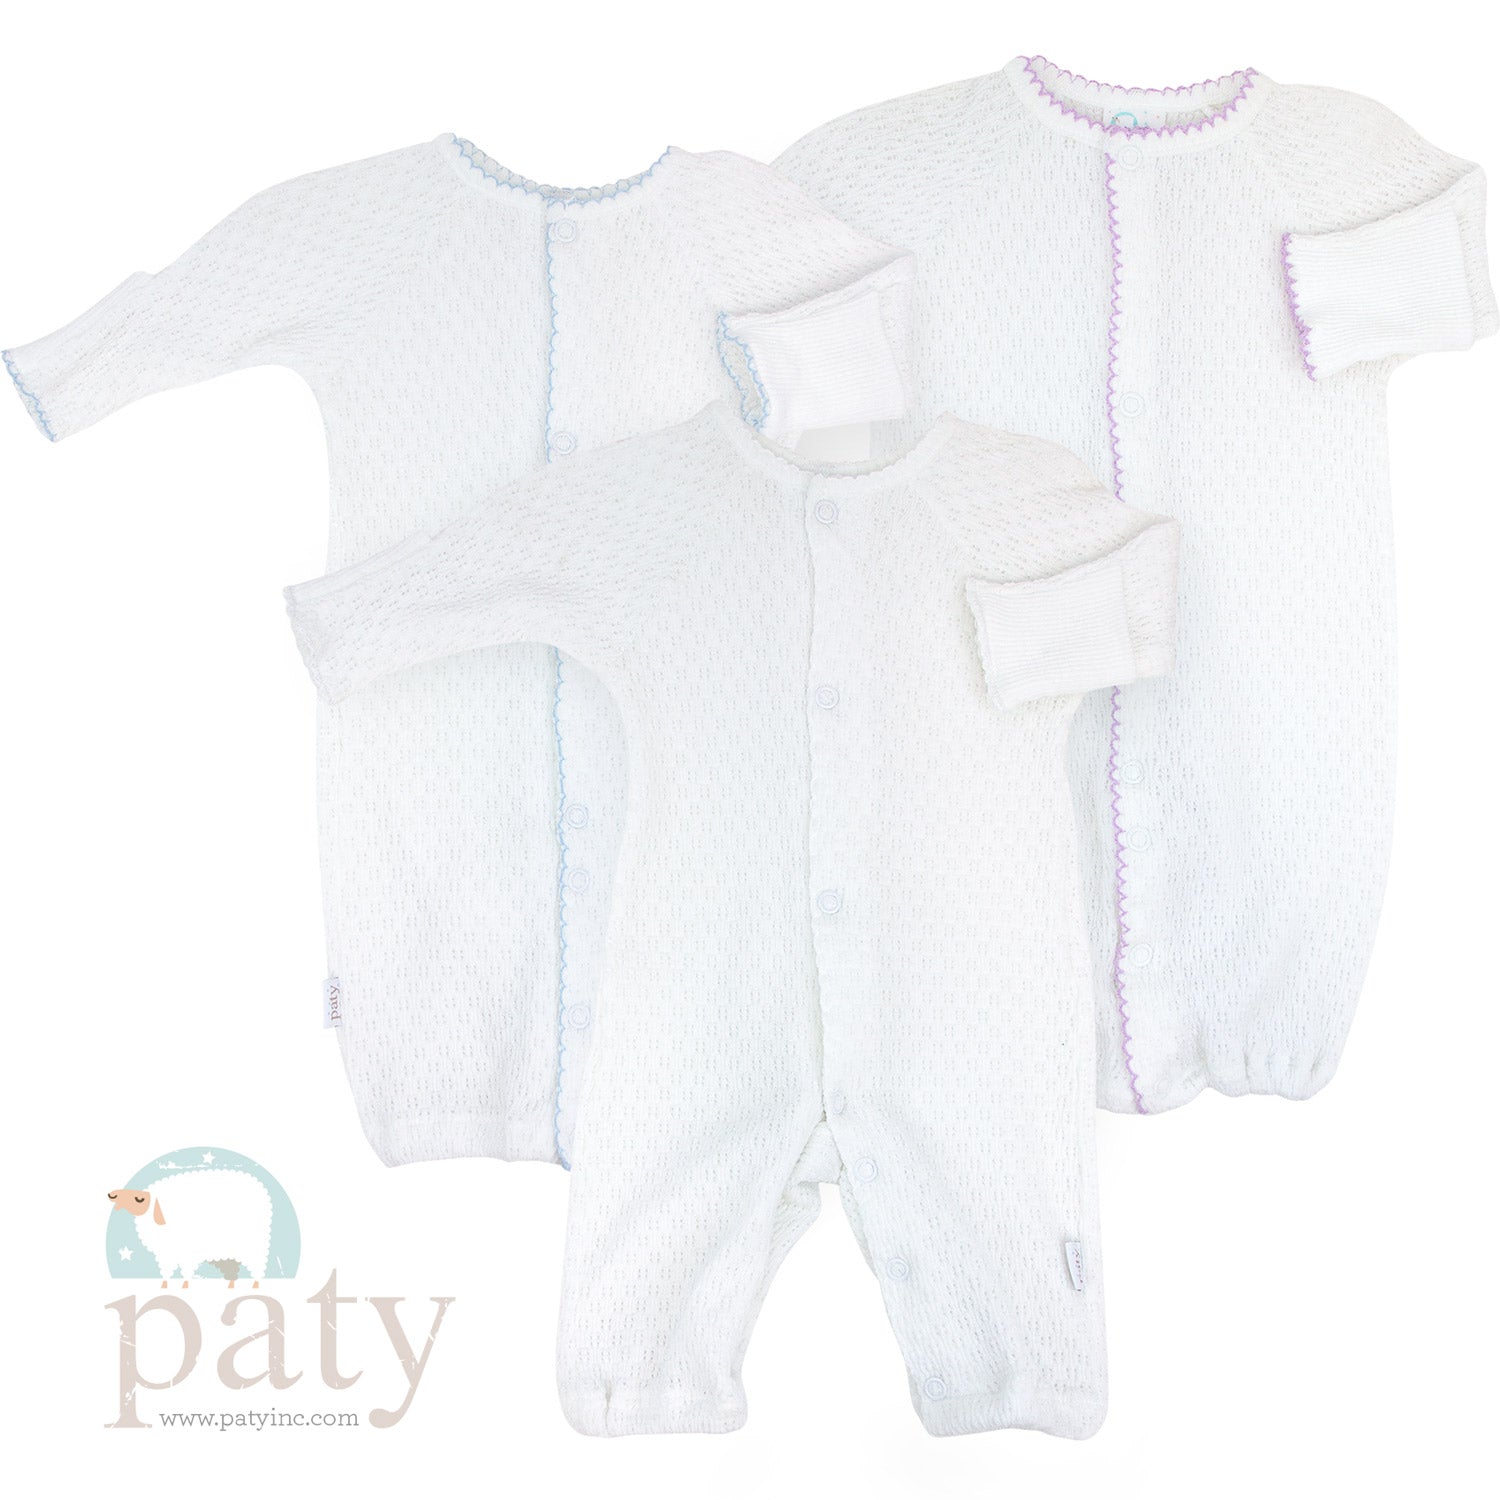 Three white Paty knit converter sleepsuits on a versatile background.